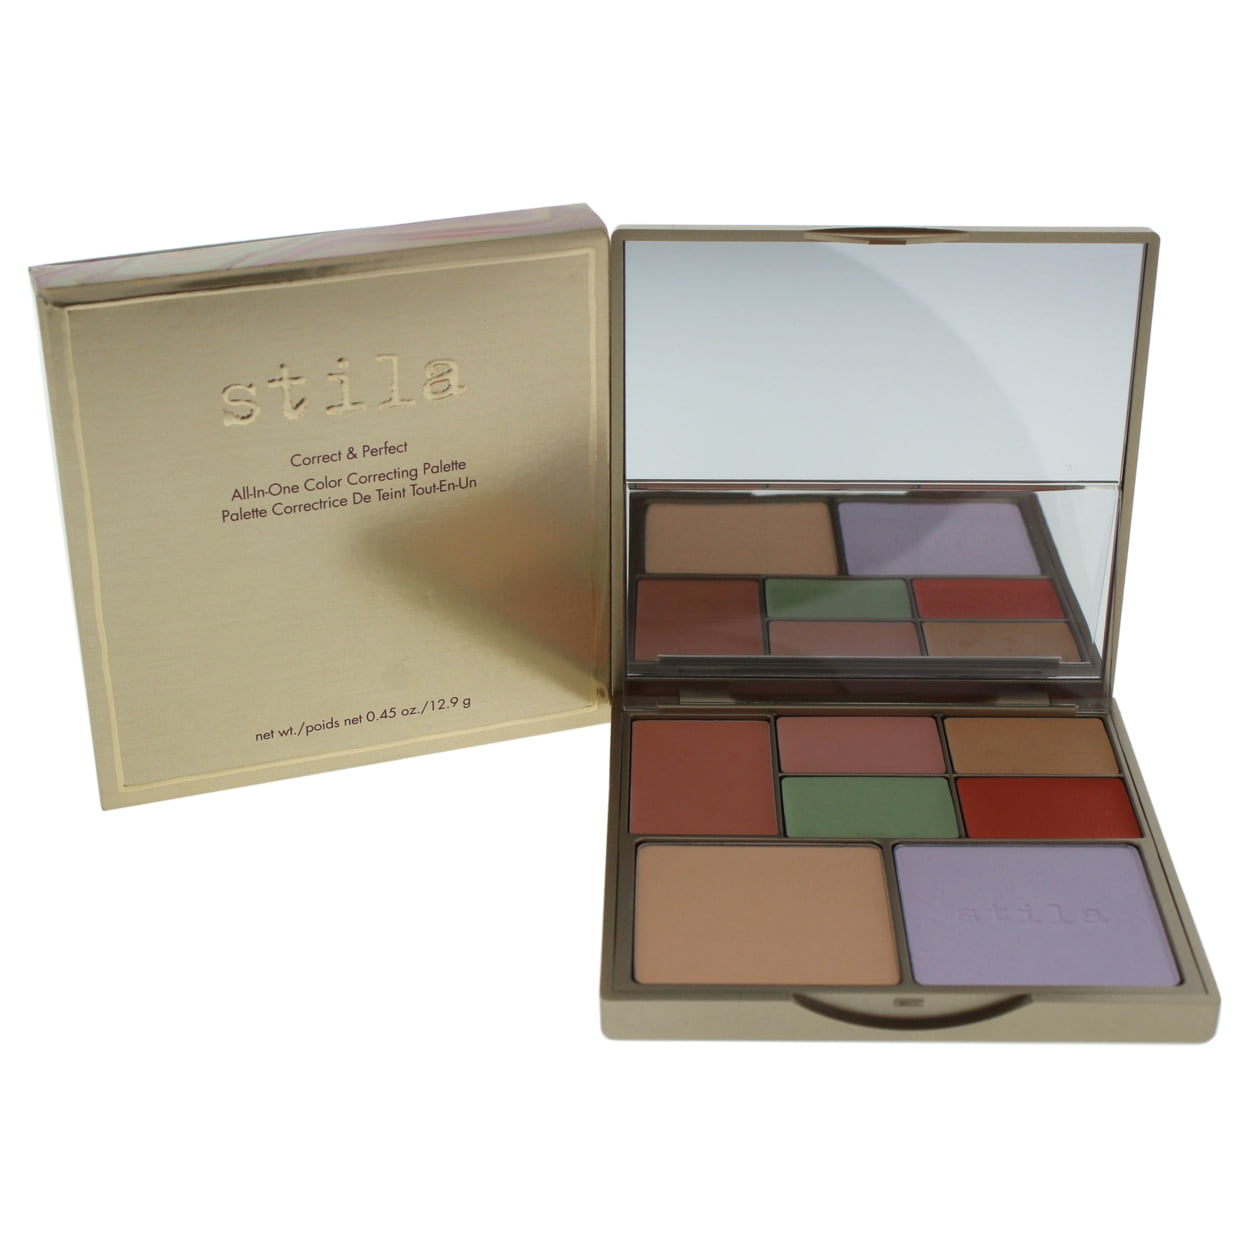 Stila Correct & Perfect All-In-One Color Correcting Makeup Palette, 0.46 Oz  - Walmart.com